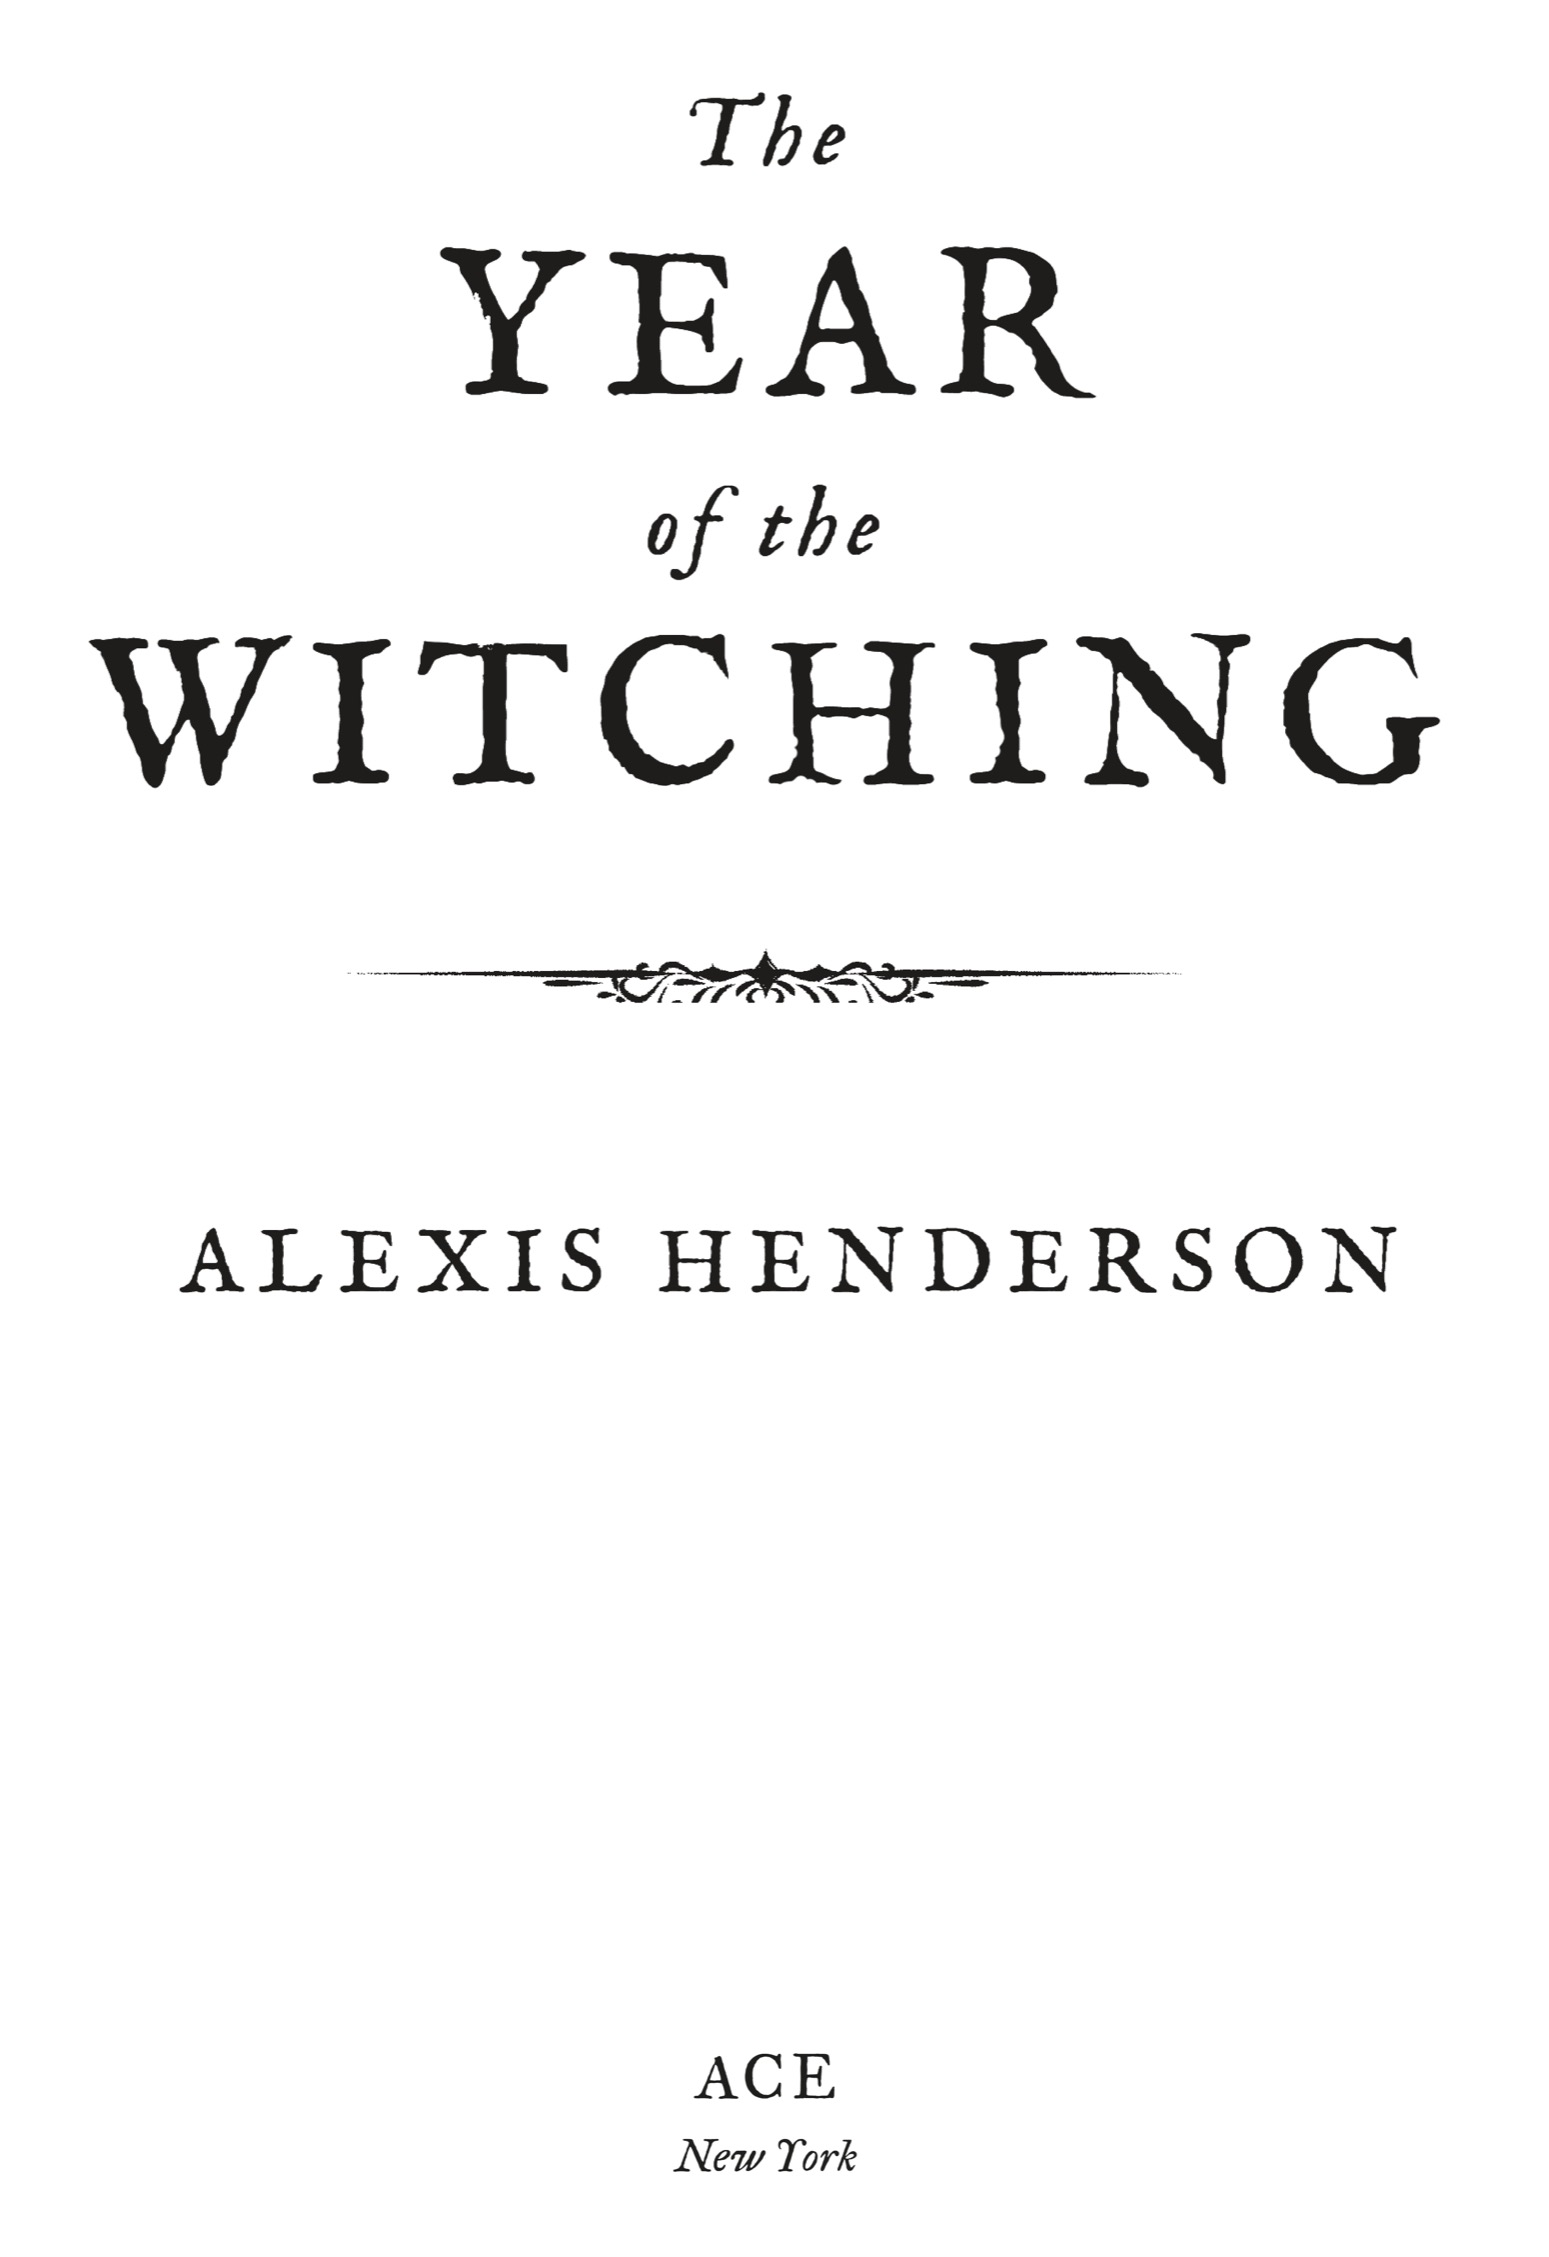 the year of the witching by alexis henderson